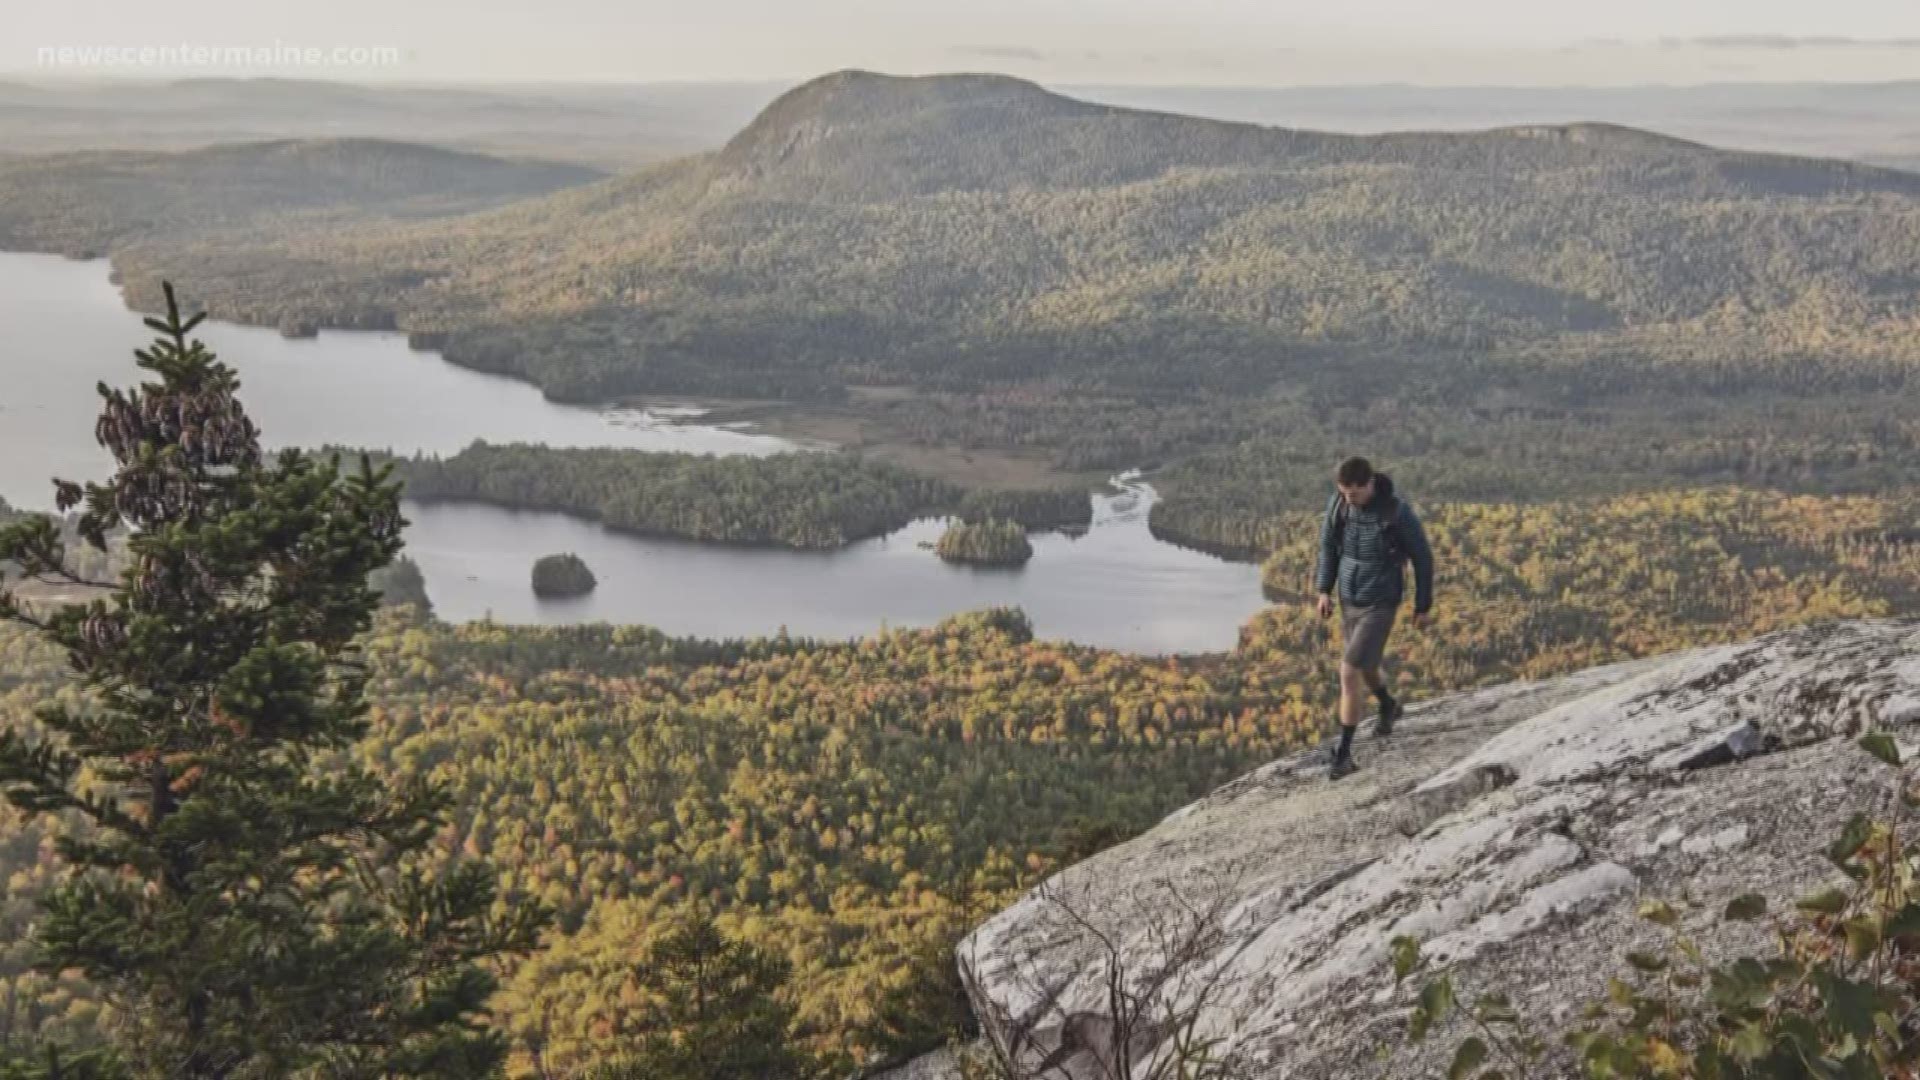 For a Maine photographer, every long-distance hiker has an interesting story